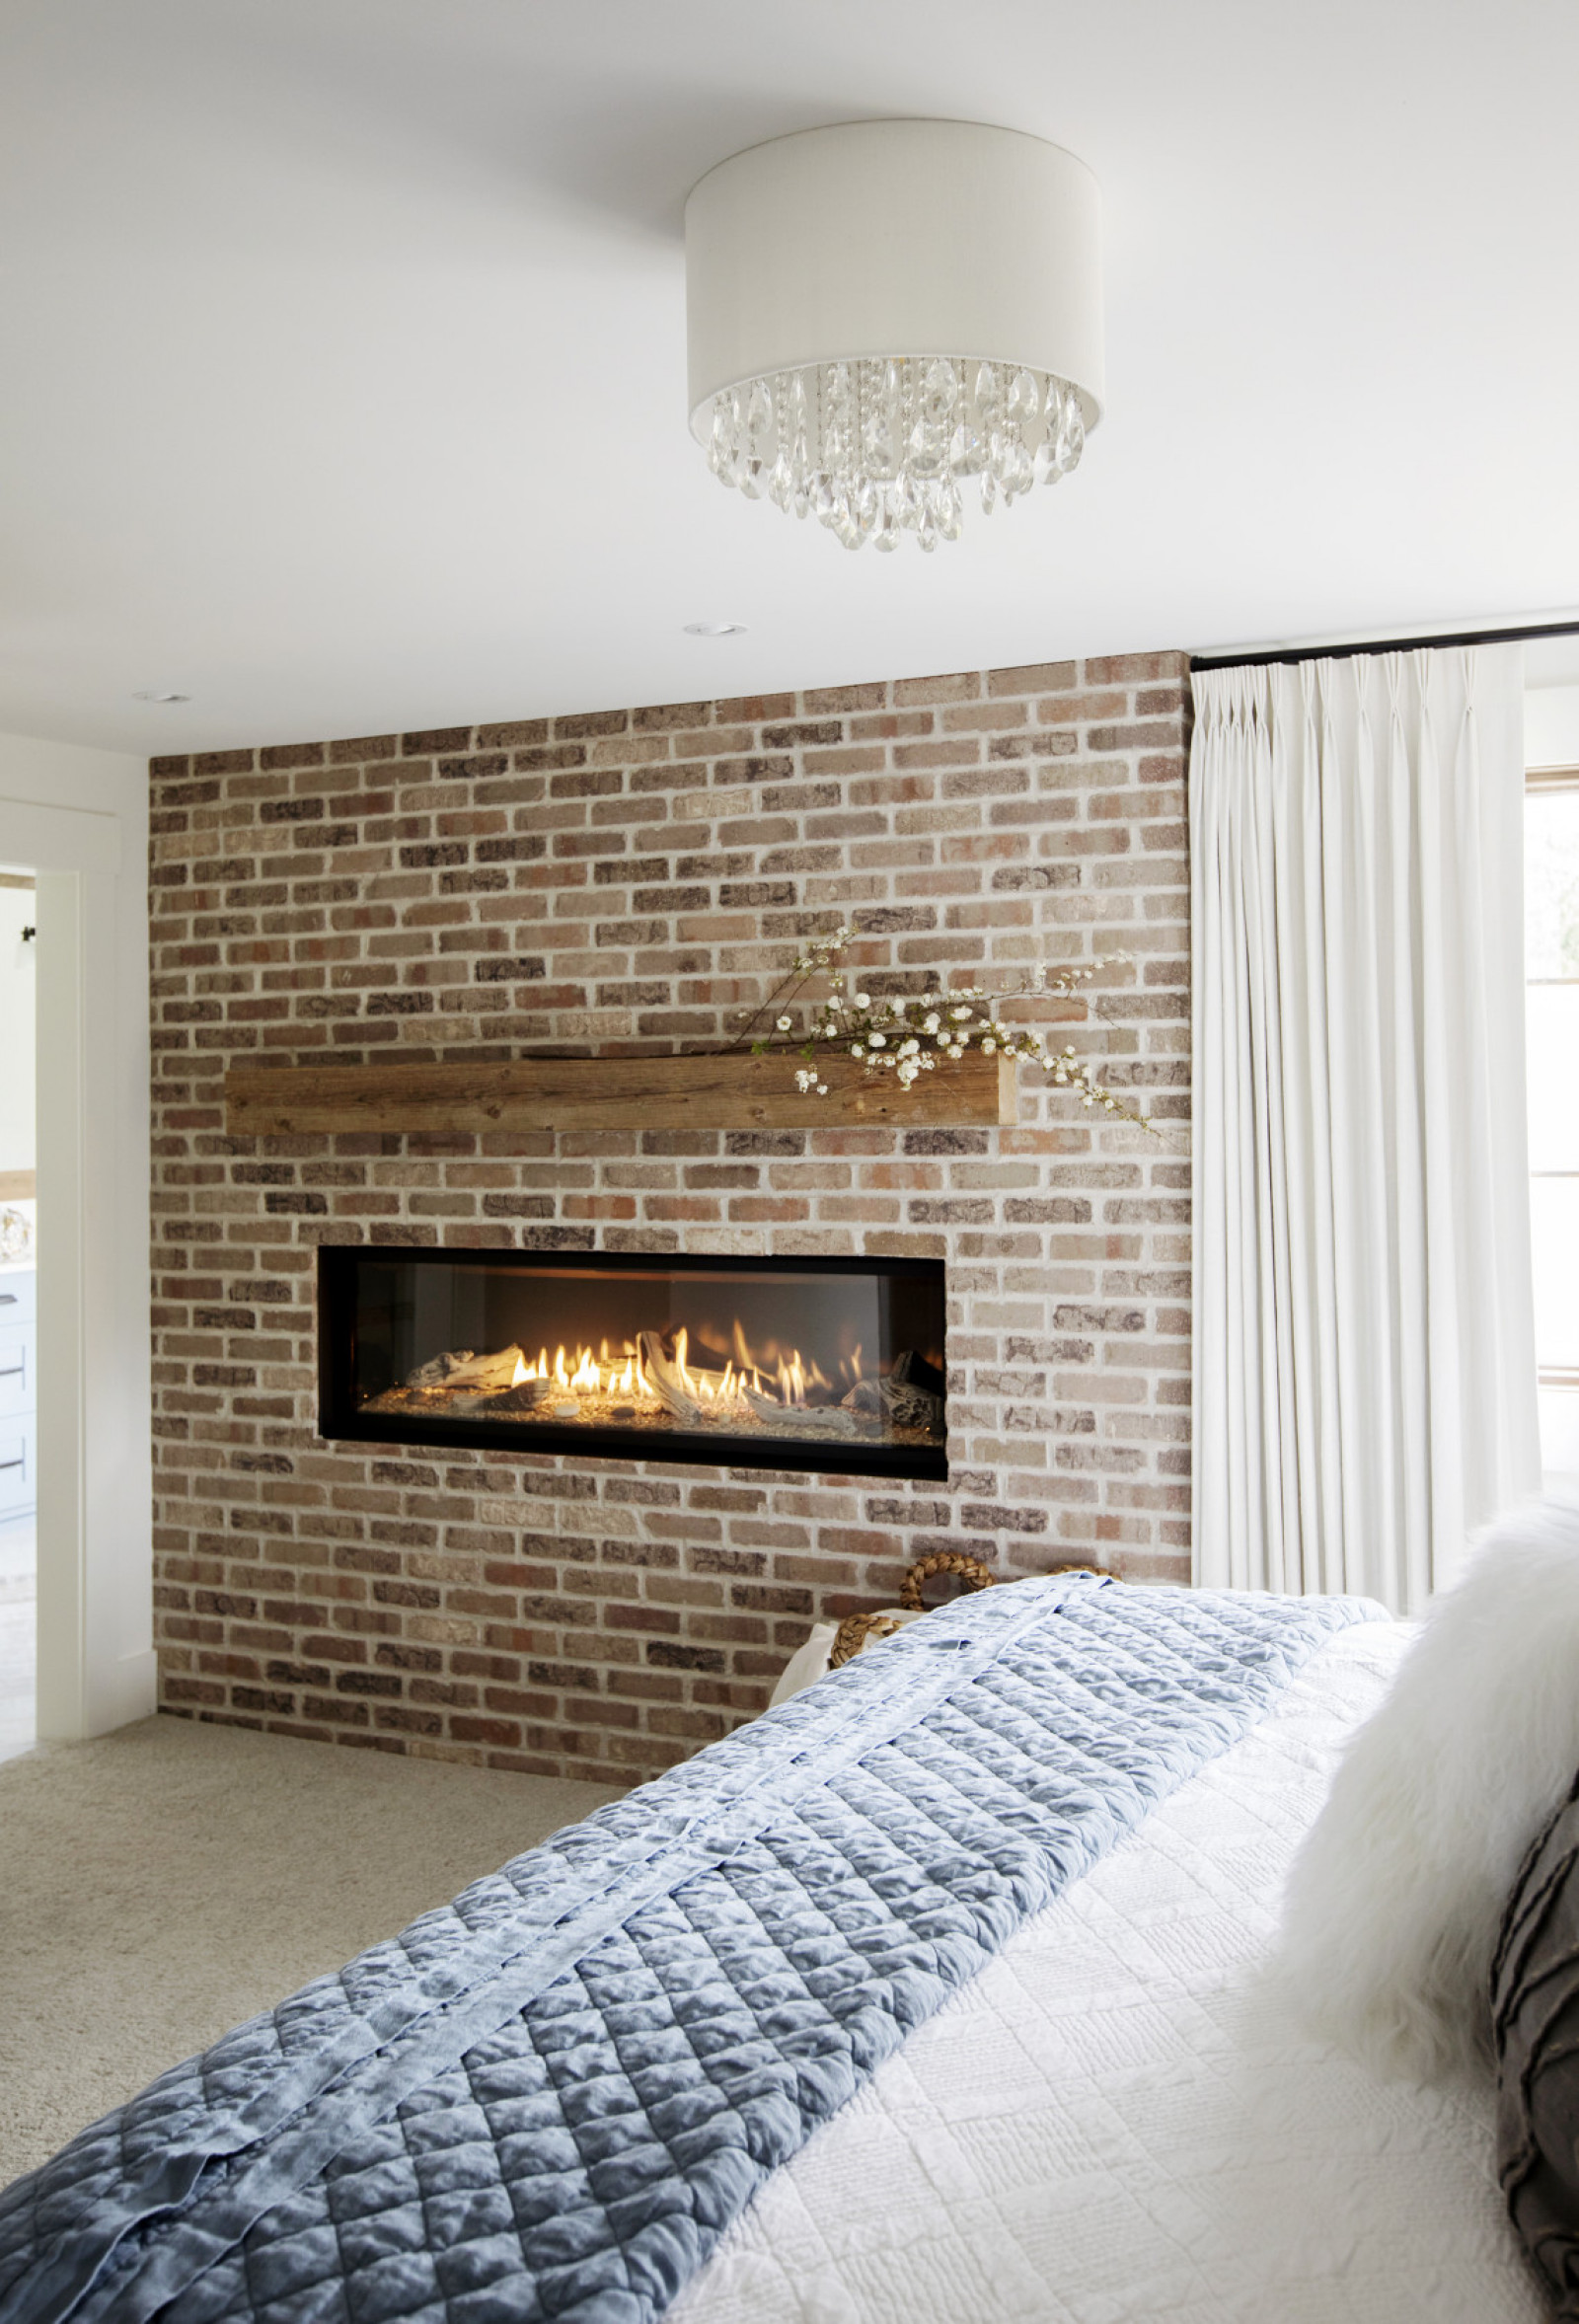 exposed brick wall with gas fireplace in bedroom